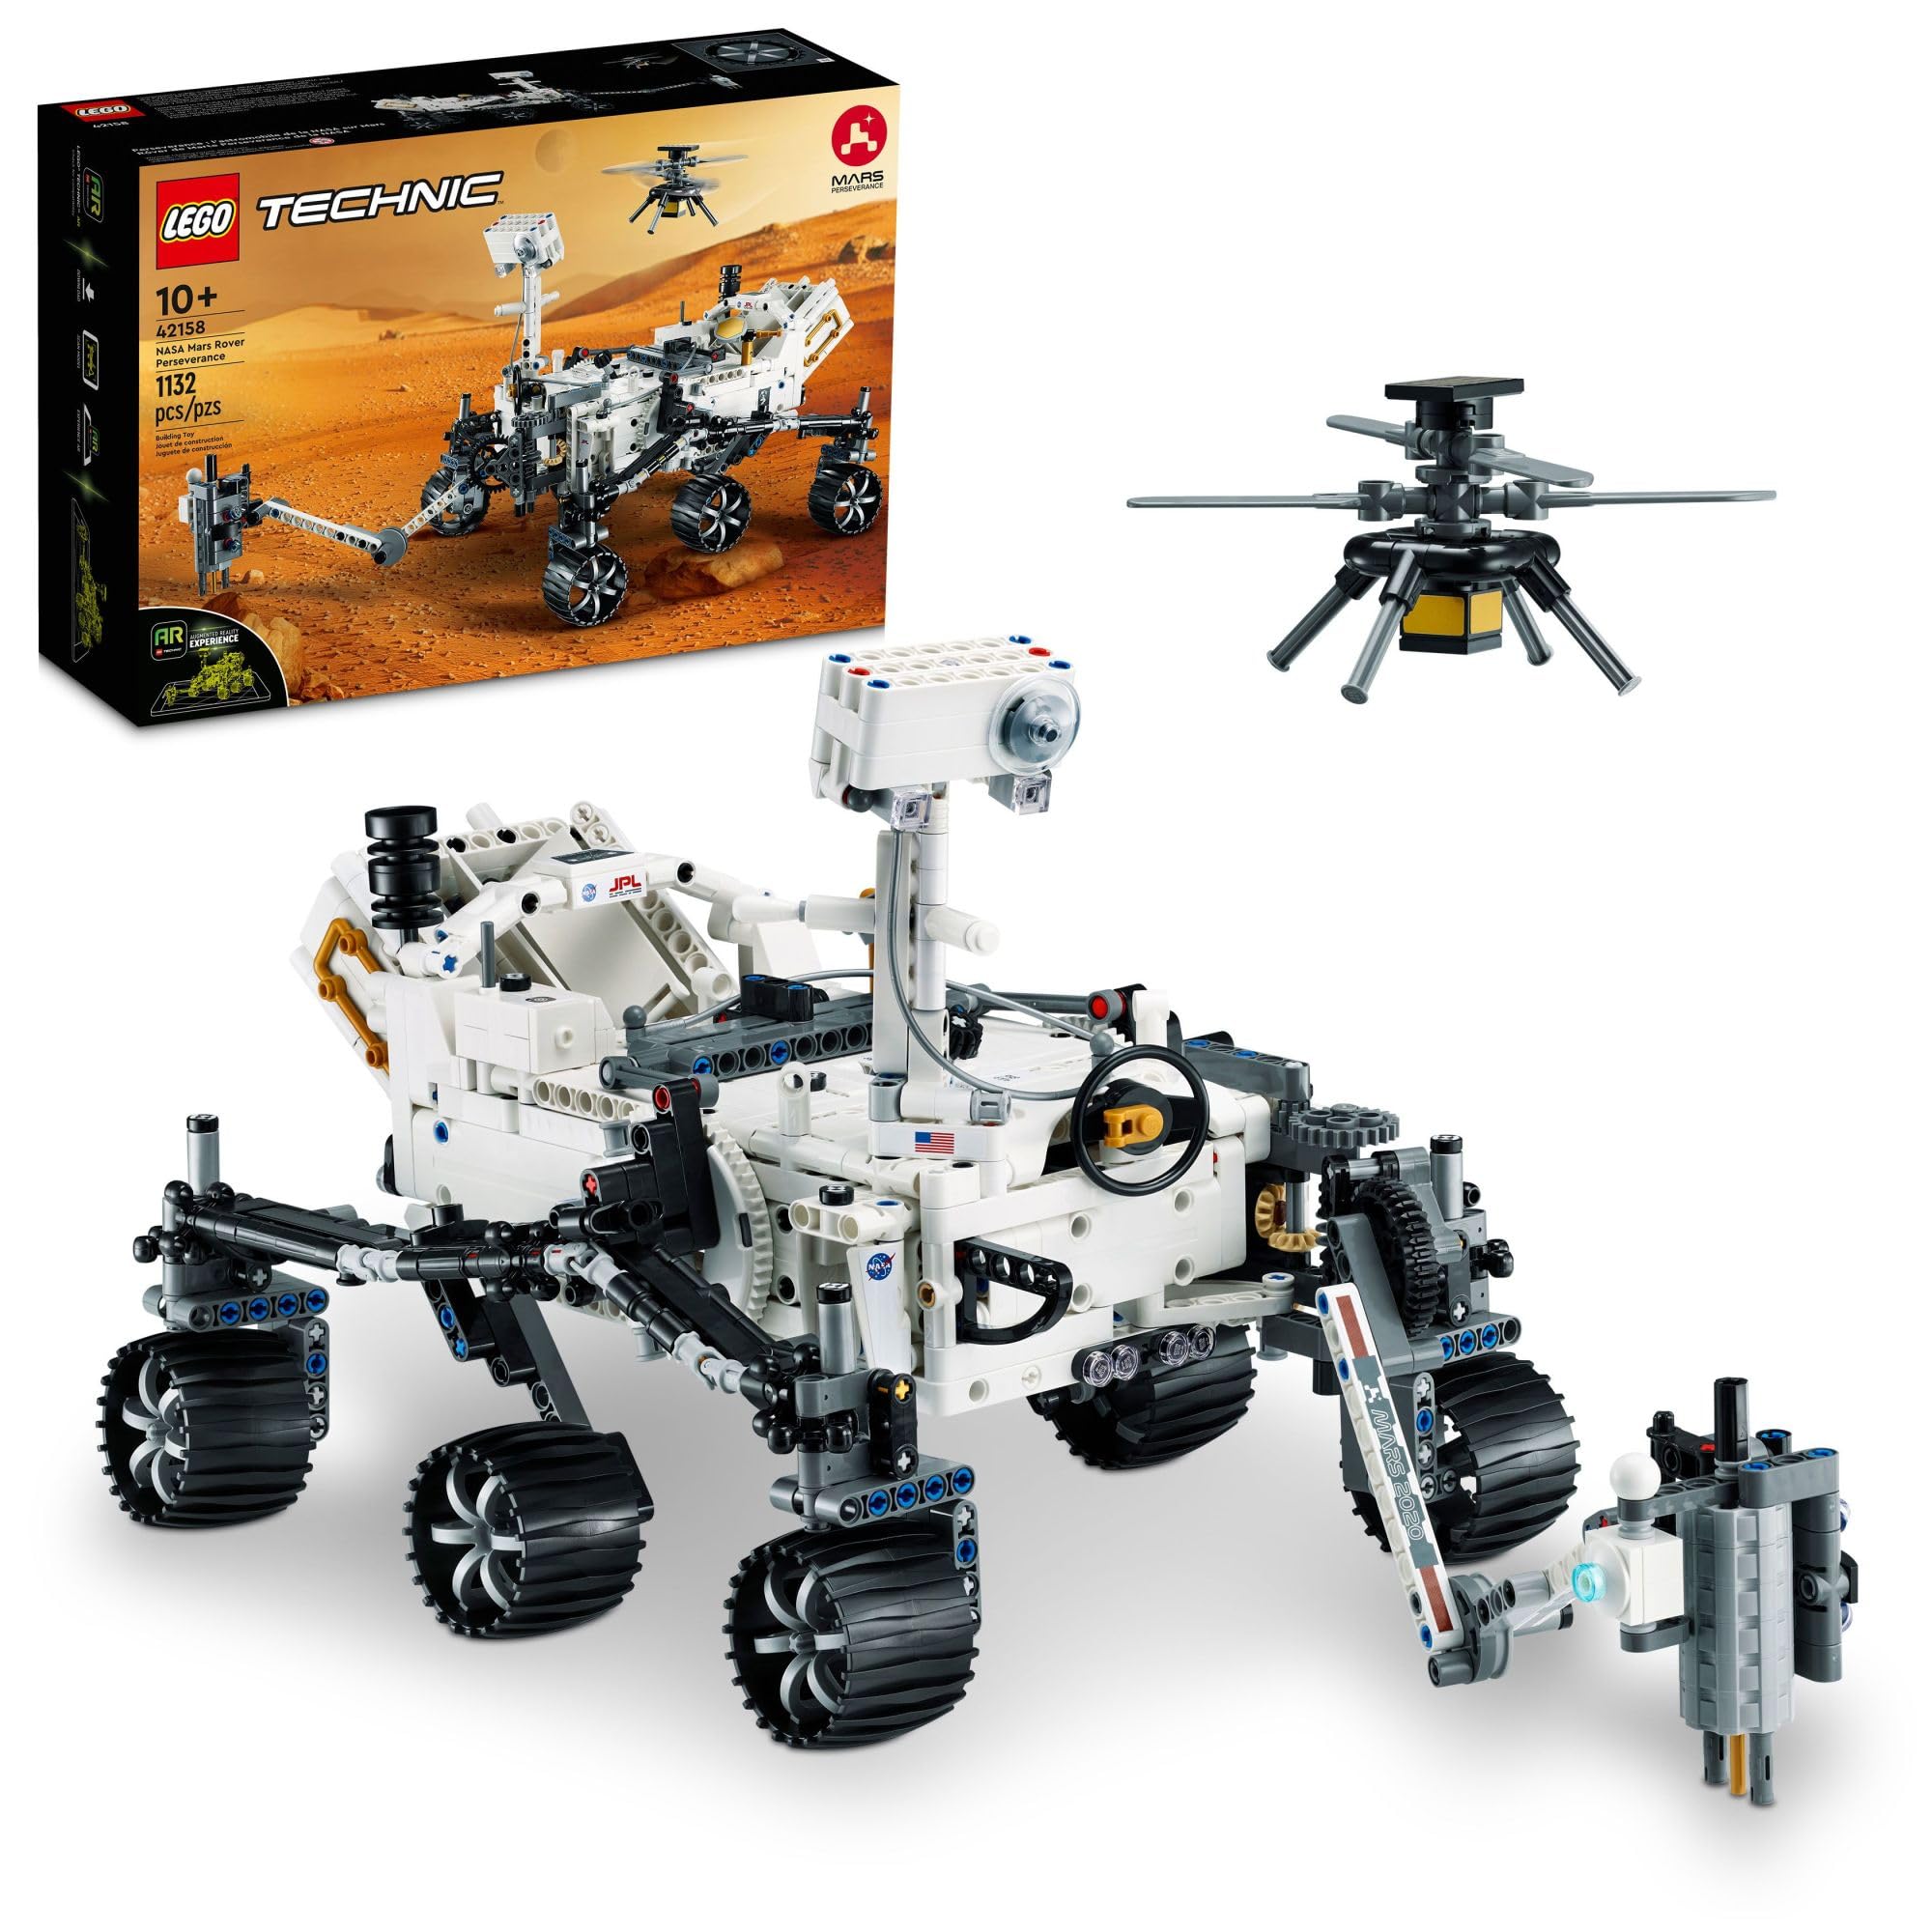 LEGO Technic NASA Mars Rover Perseverance 42158 Advanced Building Kit for Kids Ages 10+, NASA Toy with Replica Ingenuity Helicopter, Gift for Christmas for Fans of Engineering and Science Projects